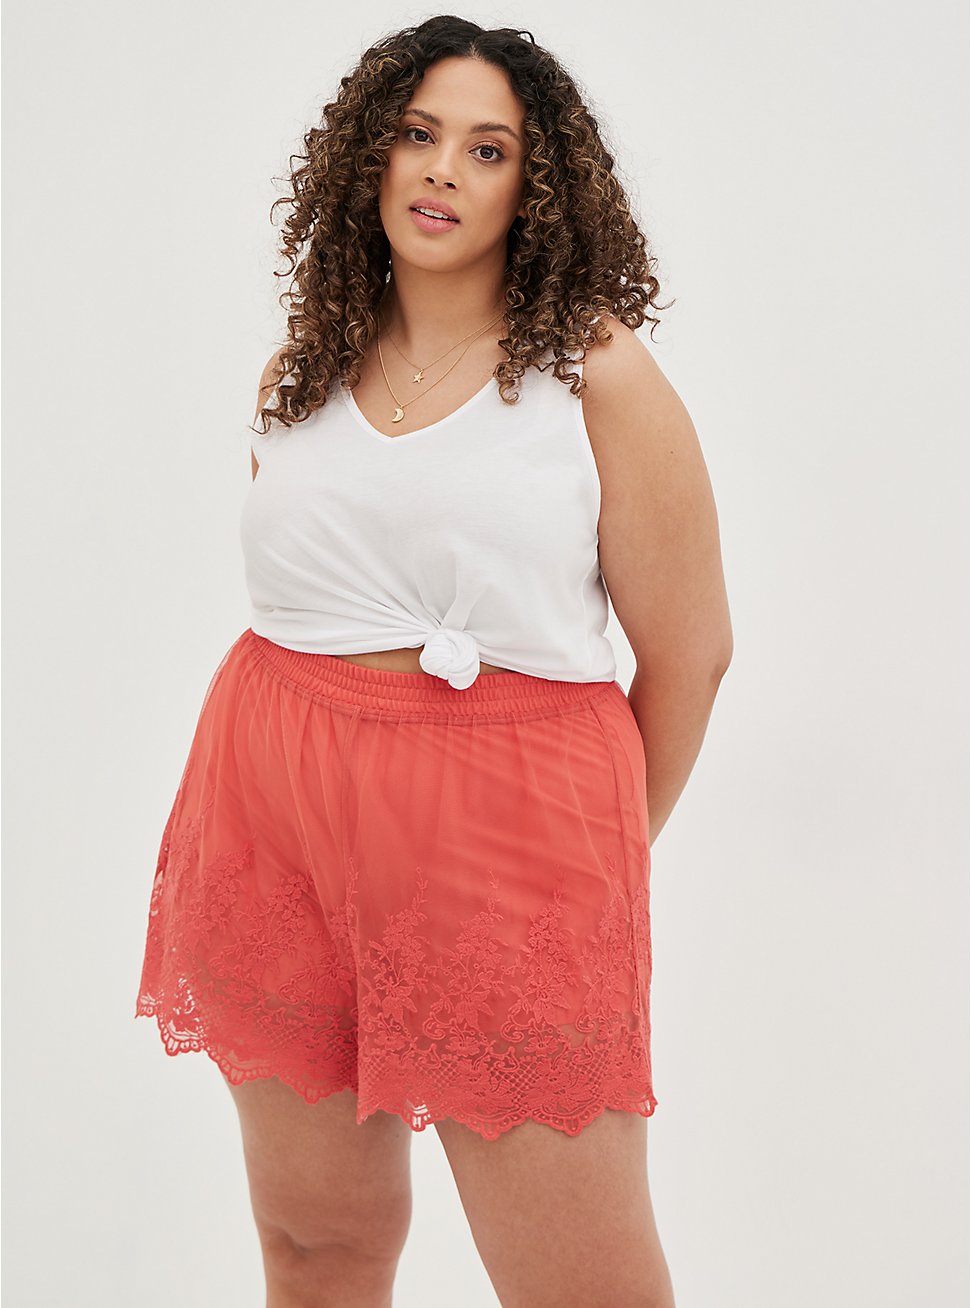 Embroidered Short - Mesh Coral, CORAL, hi-res